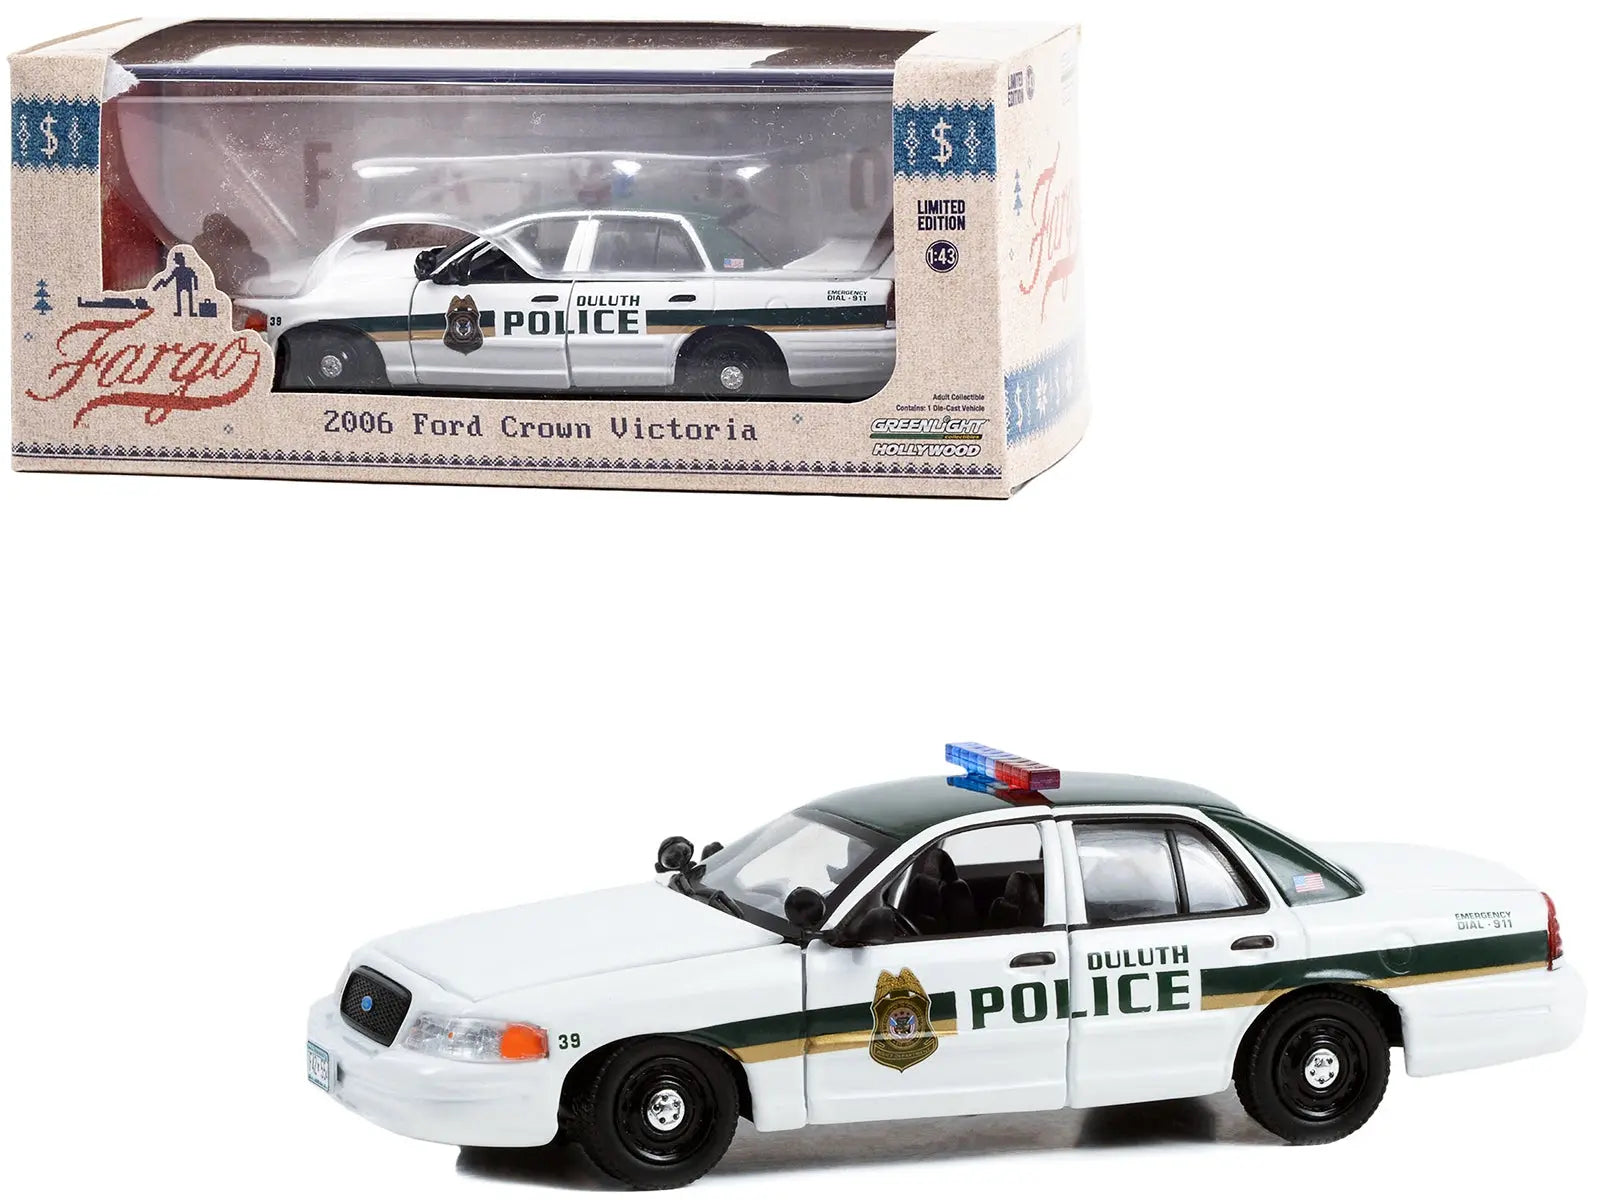 2006 Ford Crown Victoria Police Interceptor White with Green Top "Duluth Minnesota Police" "Fargo" (2014-2020 TV Series) "Hollywood" Series 1/43 Diecast Model Car by Greenlight Greenlight